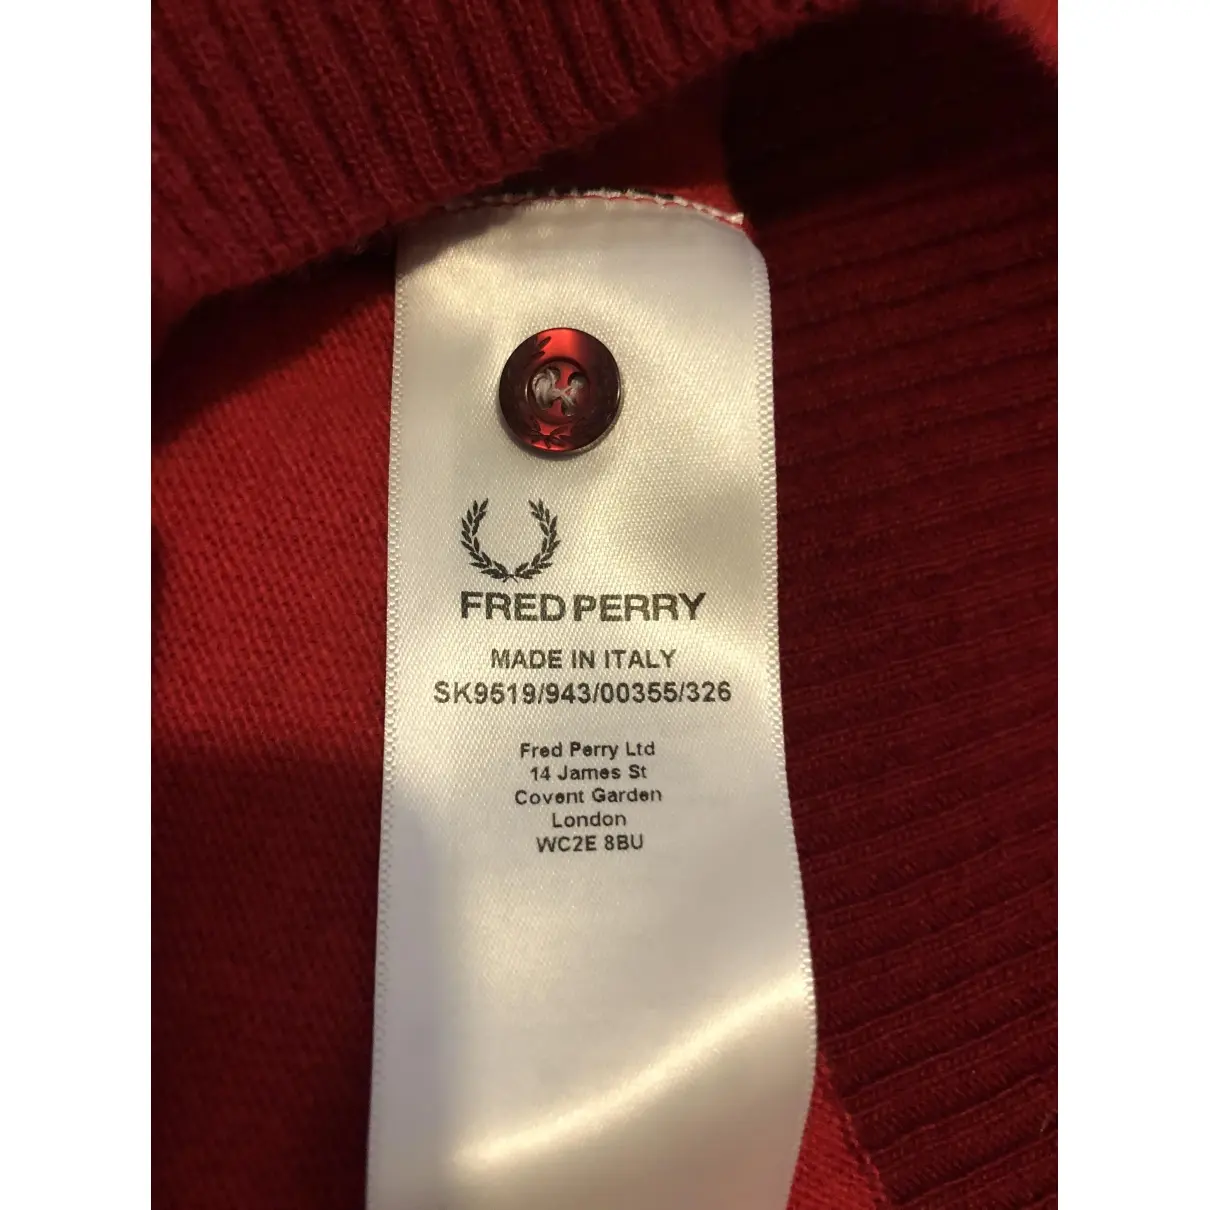 Buy Fred Perry Polo shirt online